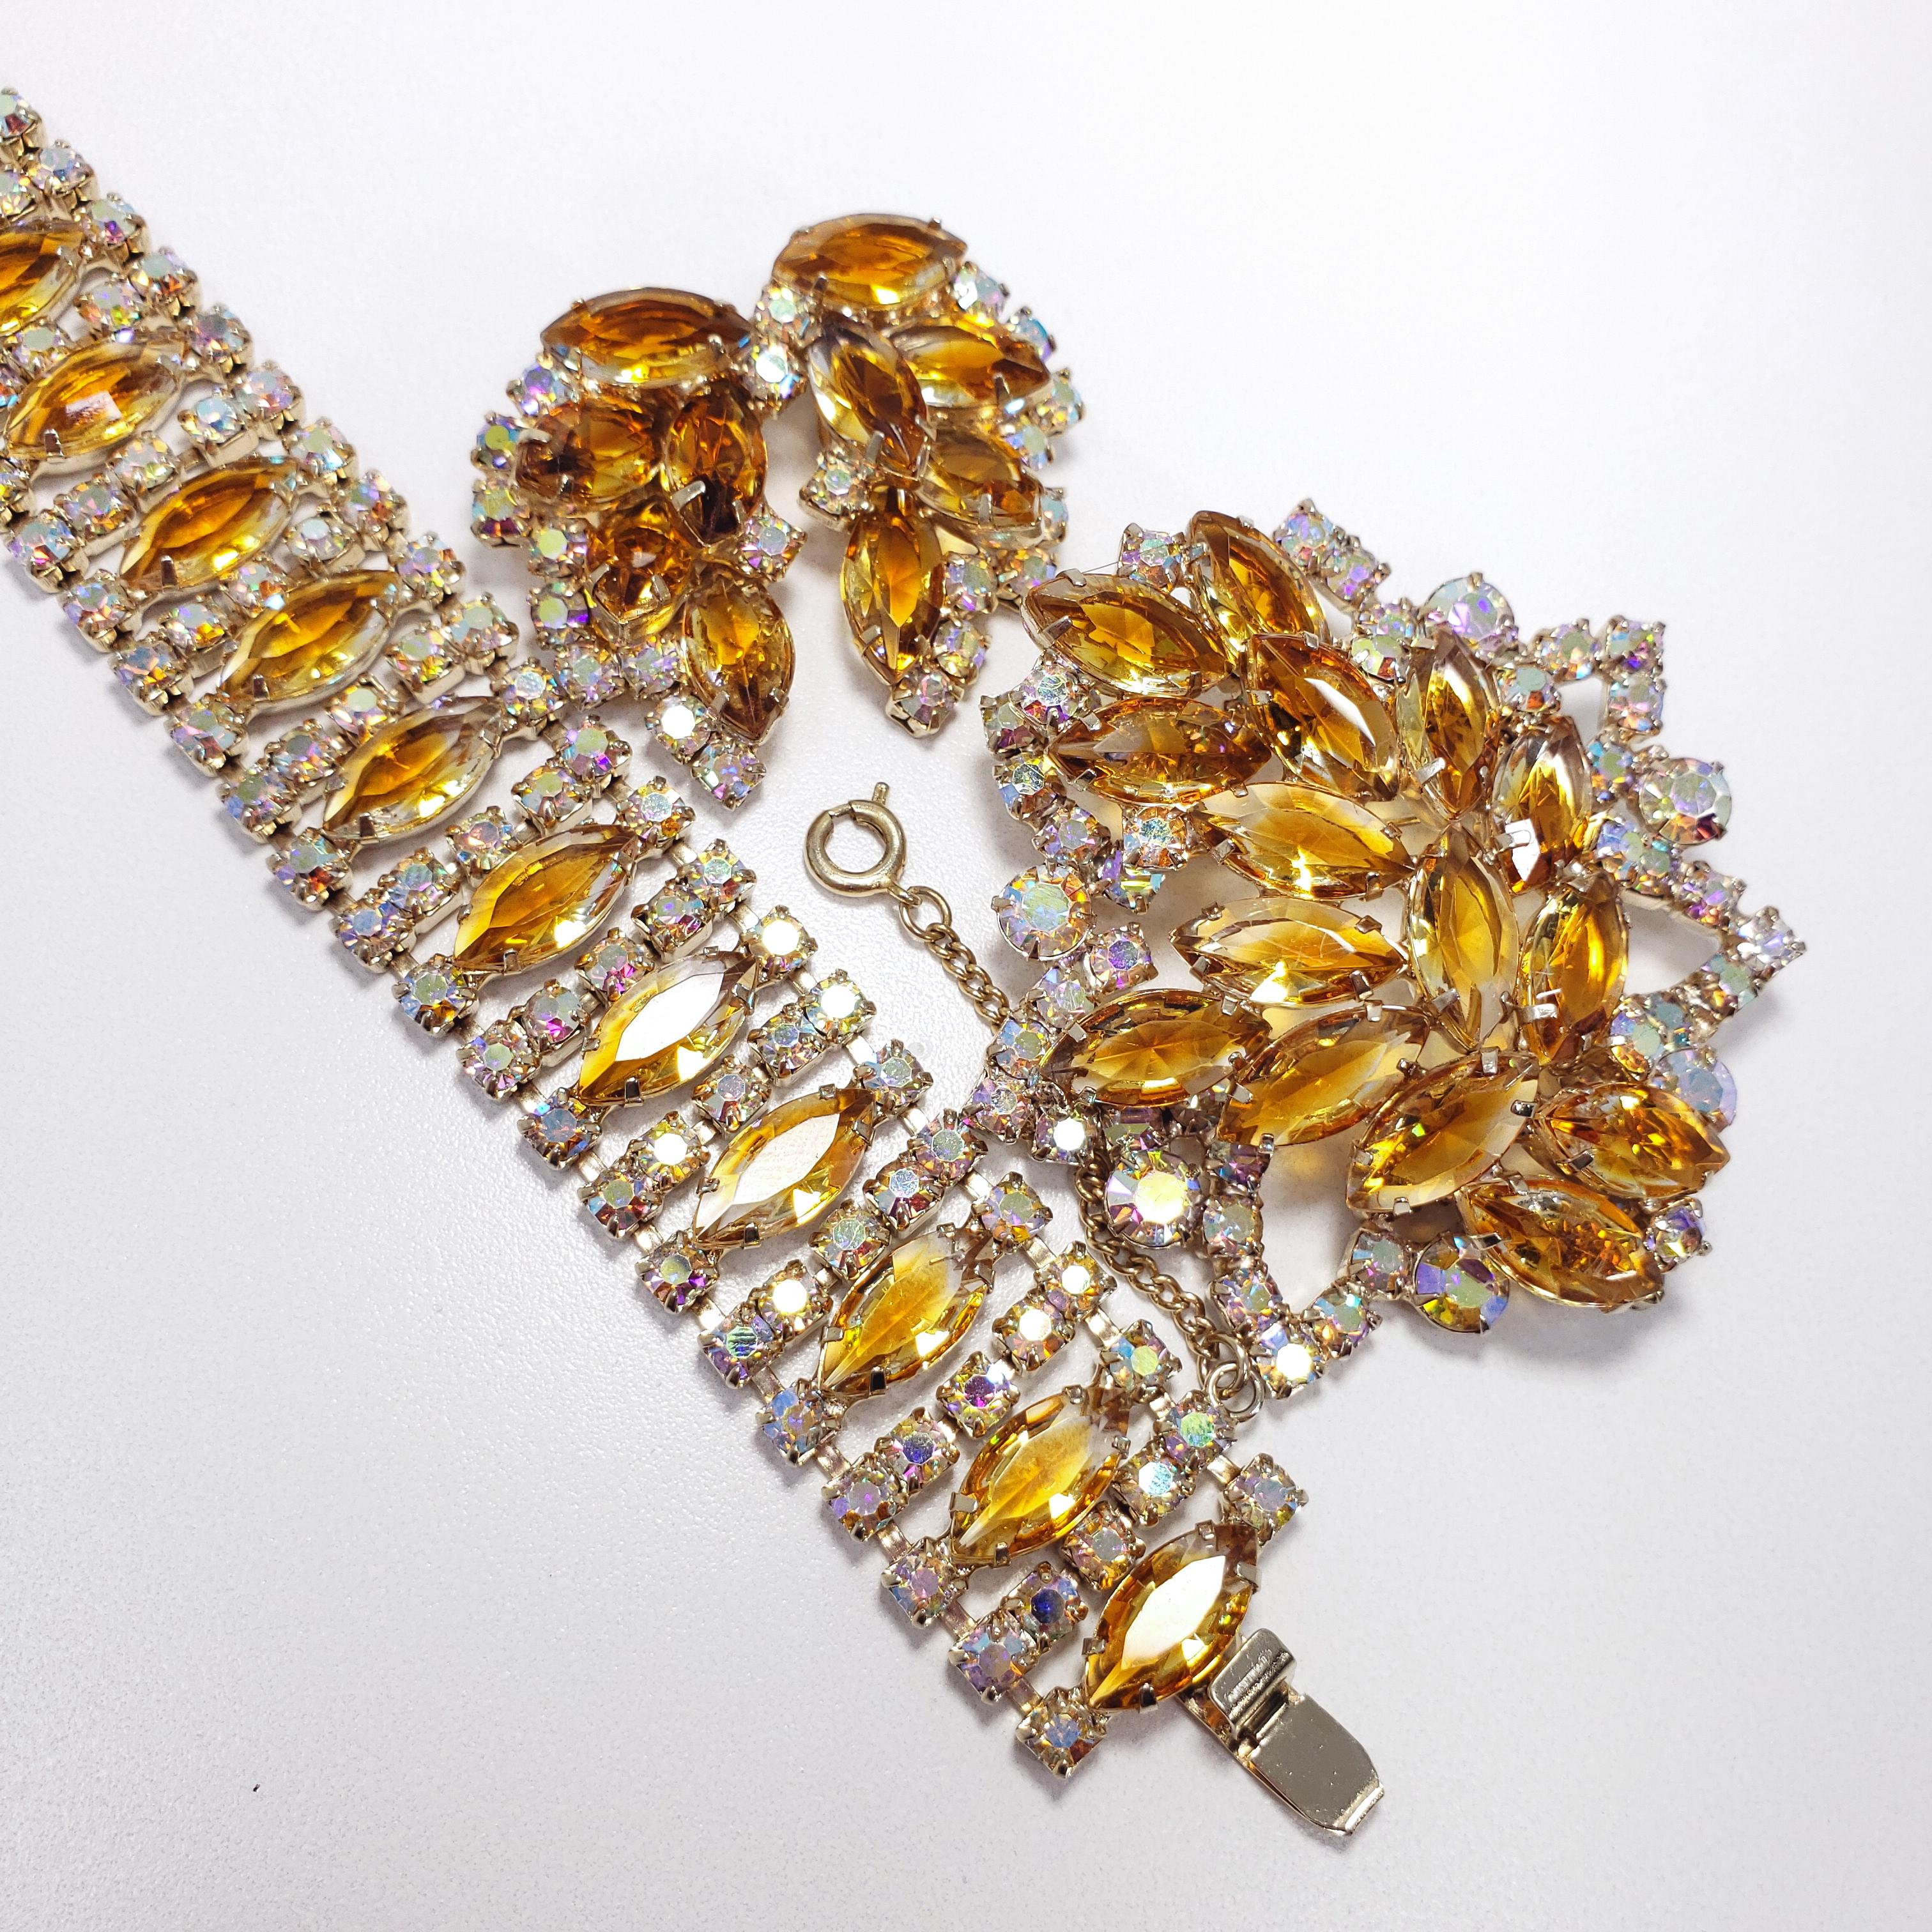 A dazzling demi-parure, featuring a bracelet, earrings, and brooch. Amber colored navettes and aurora borealis chatons, all prong set. Reminiscent of the styles of famous designers such as Weiss and DeLizza Juliana & Elster, with just as much